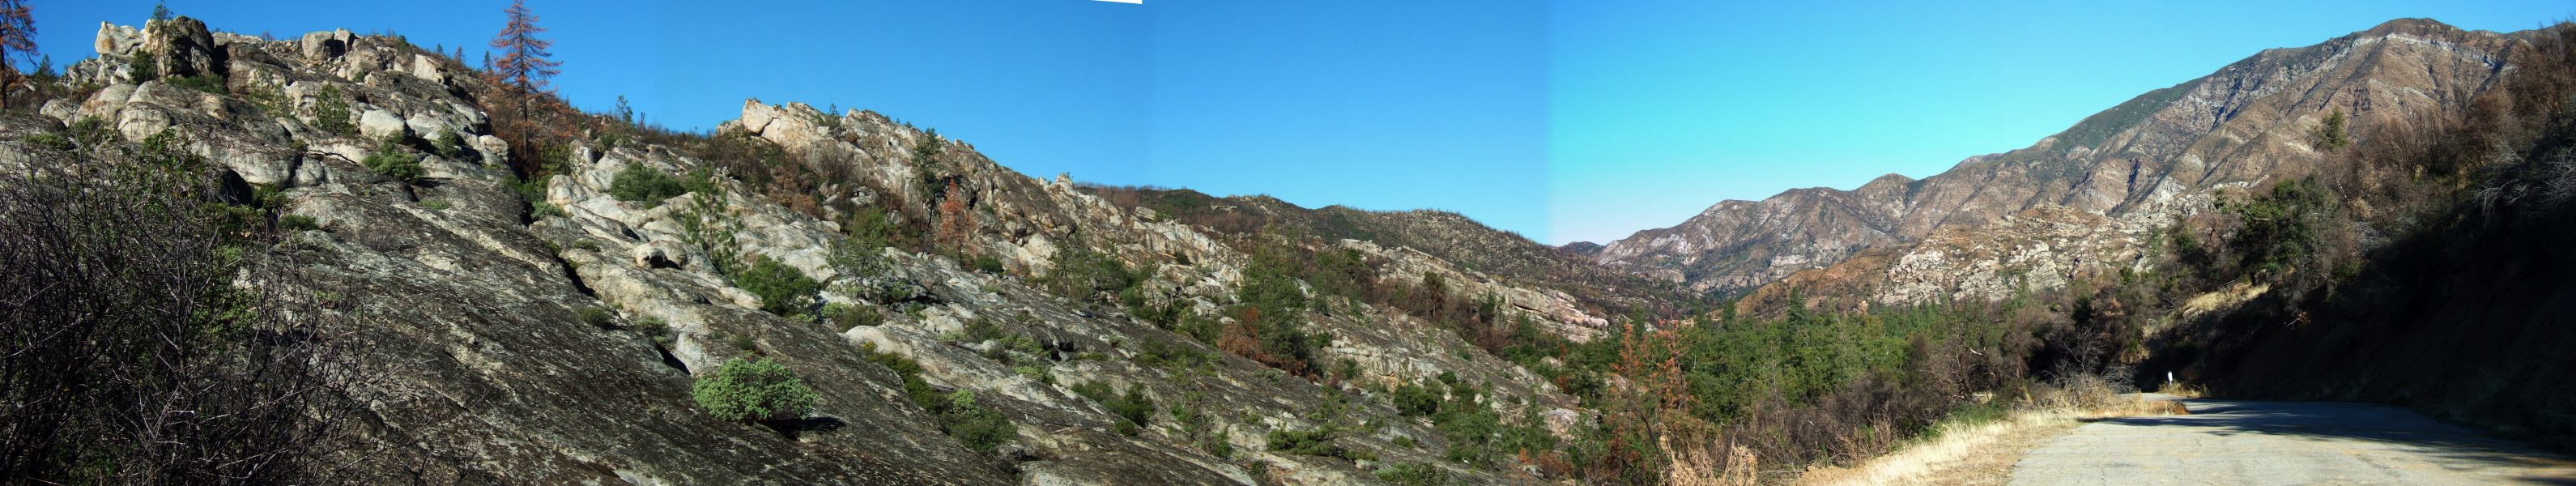 Panorama of upper Arroyo Seco canyon near Indians Station.